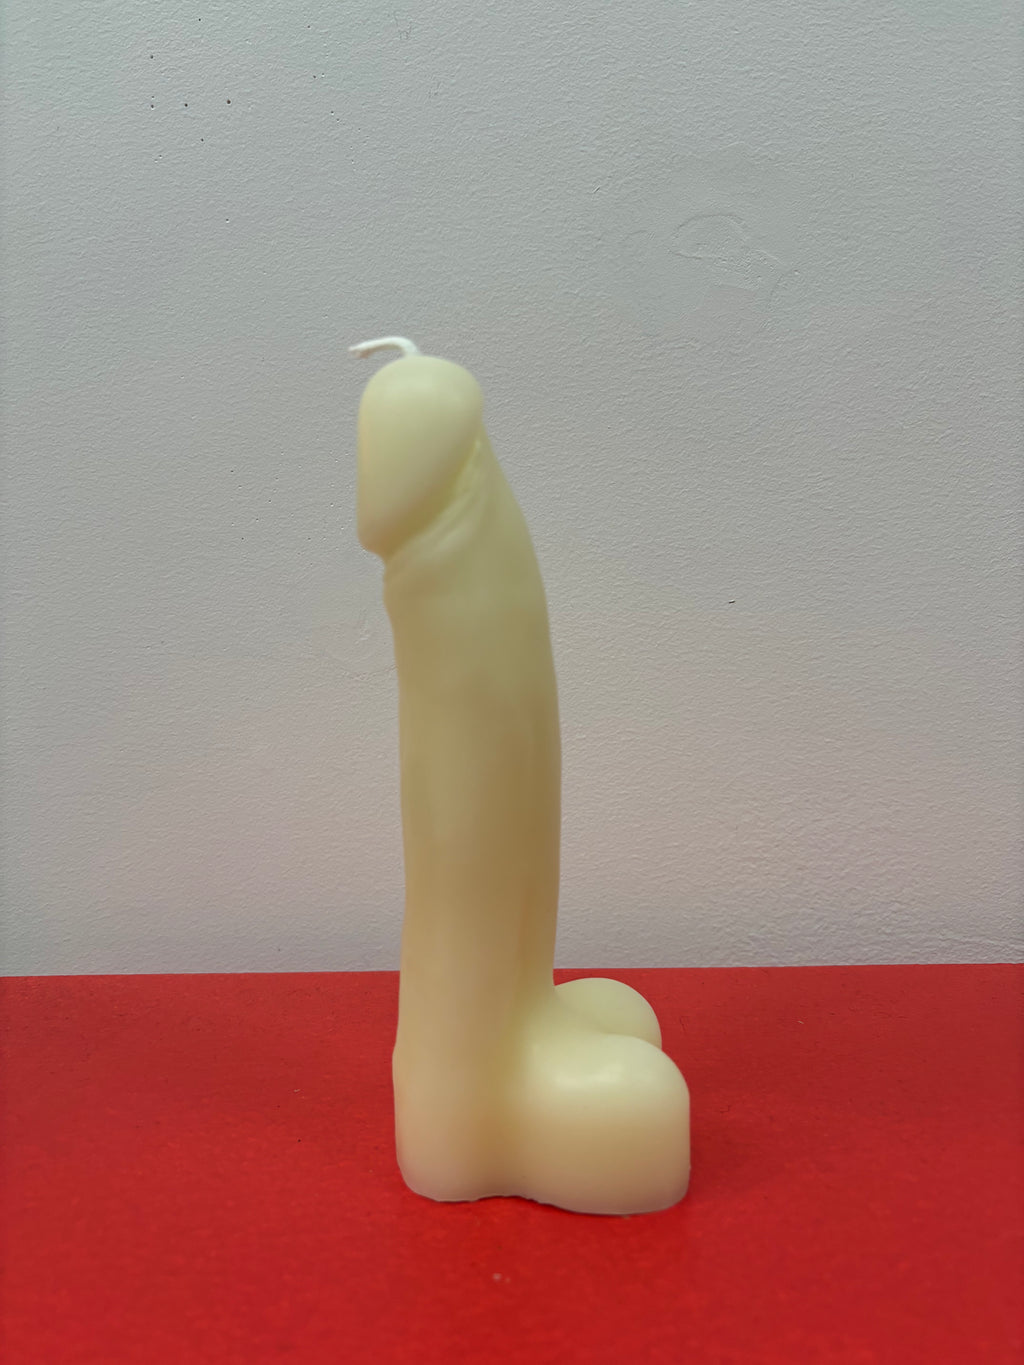 Lingam Candle/ the Sacred/ Penis Candle White